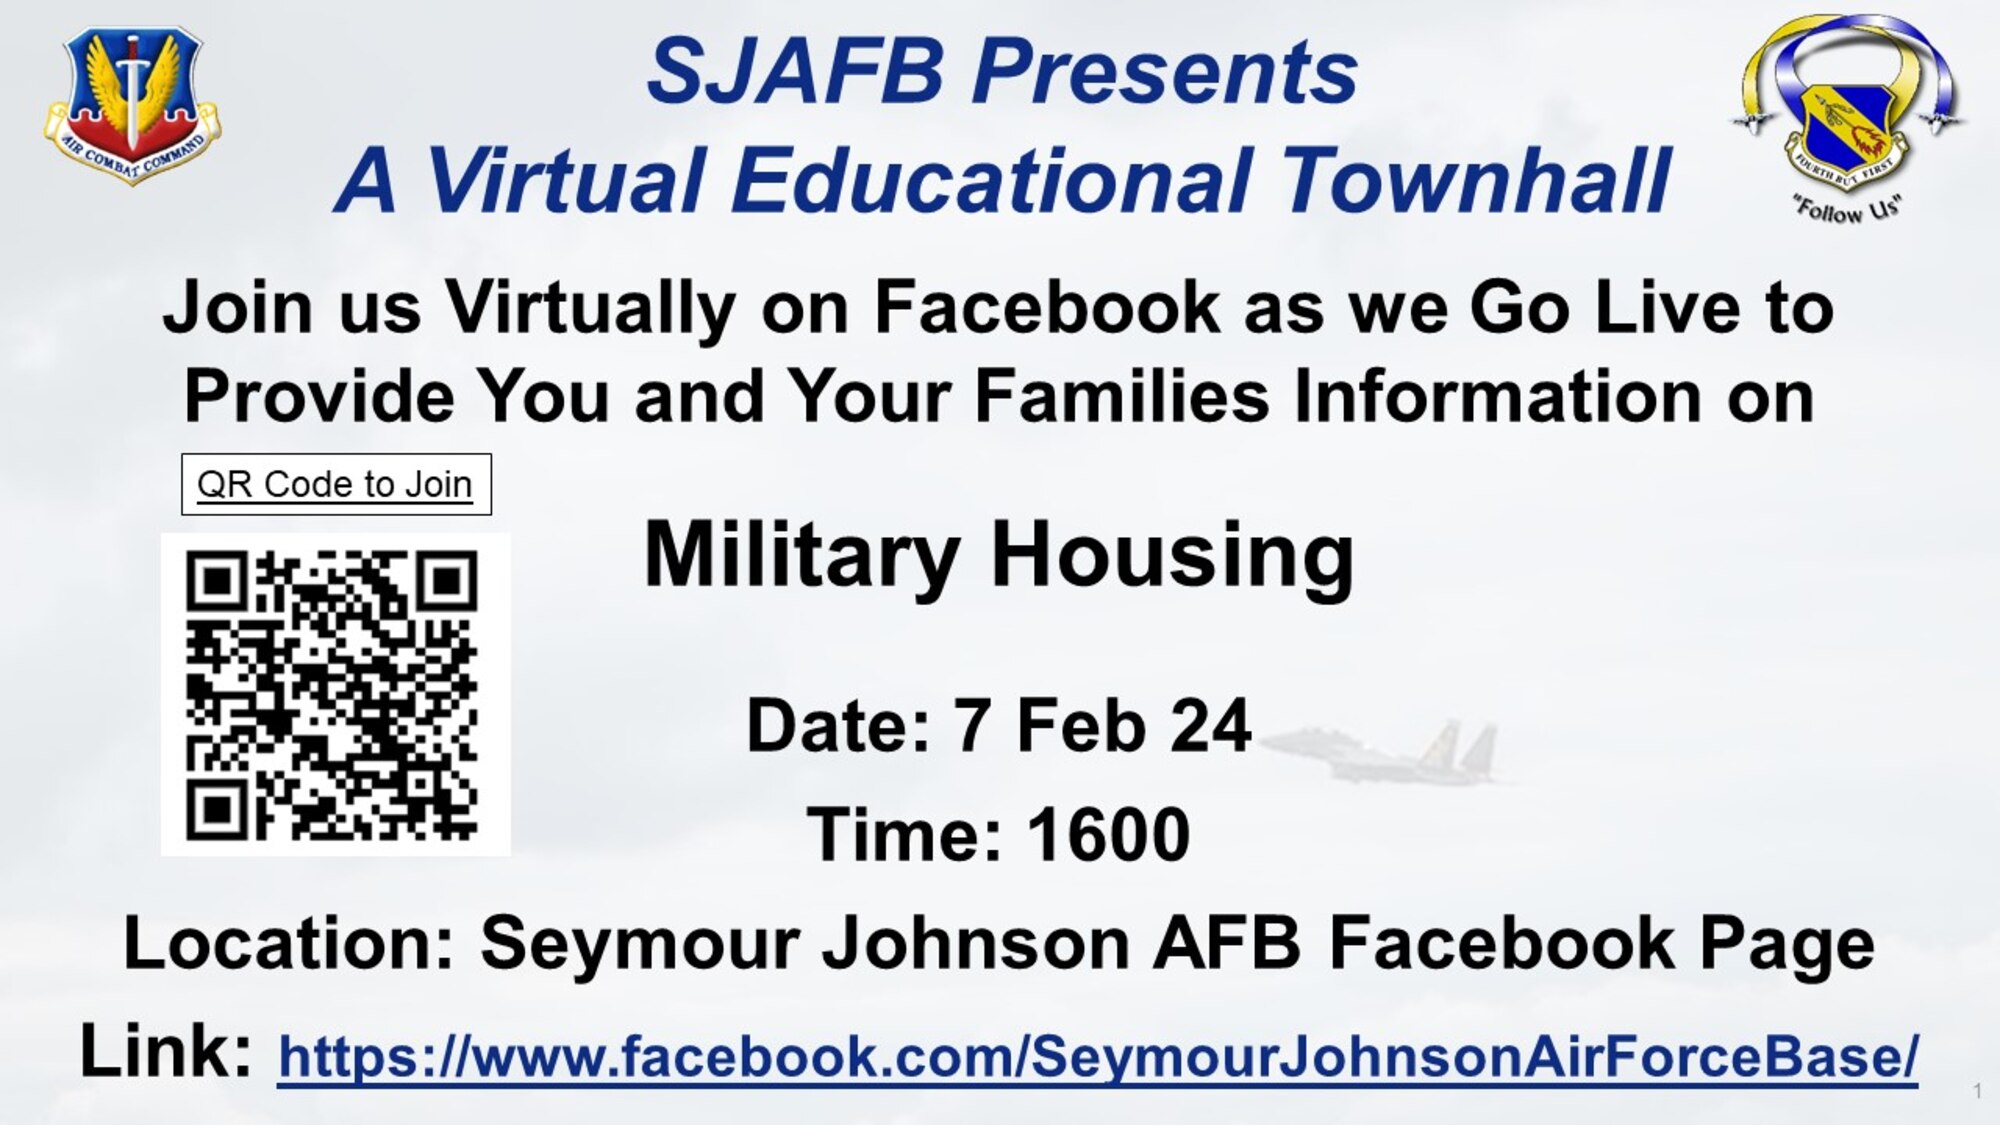 Join us virtually on Facebook as we go live to provide you and your families information on military housing on Feb. 7, 2024.